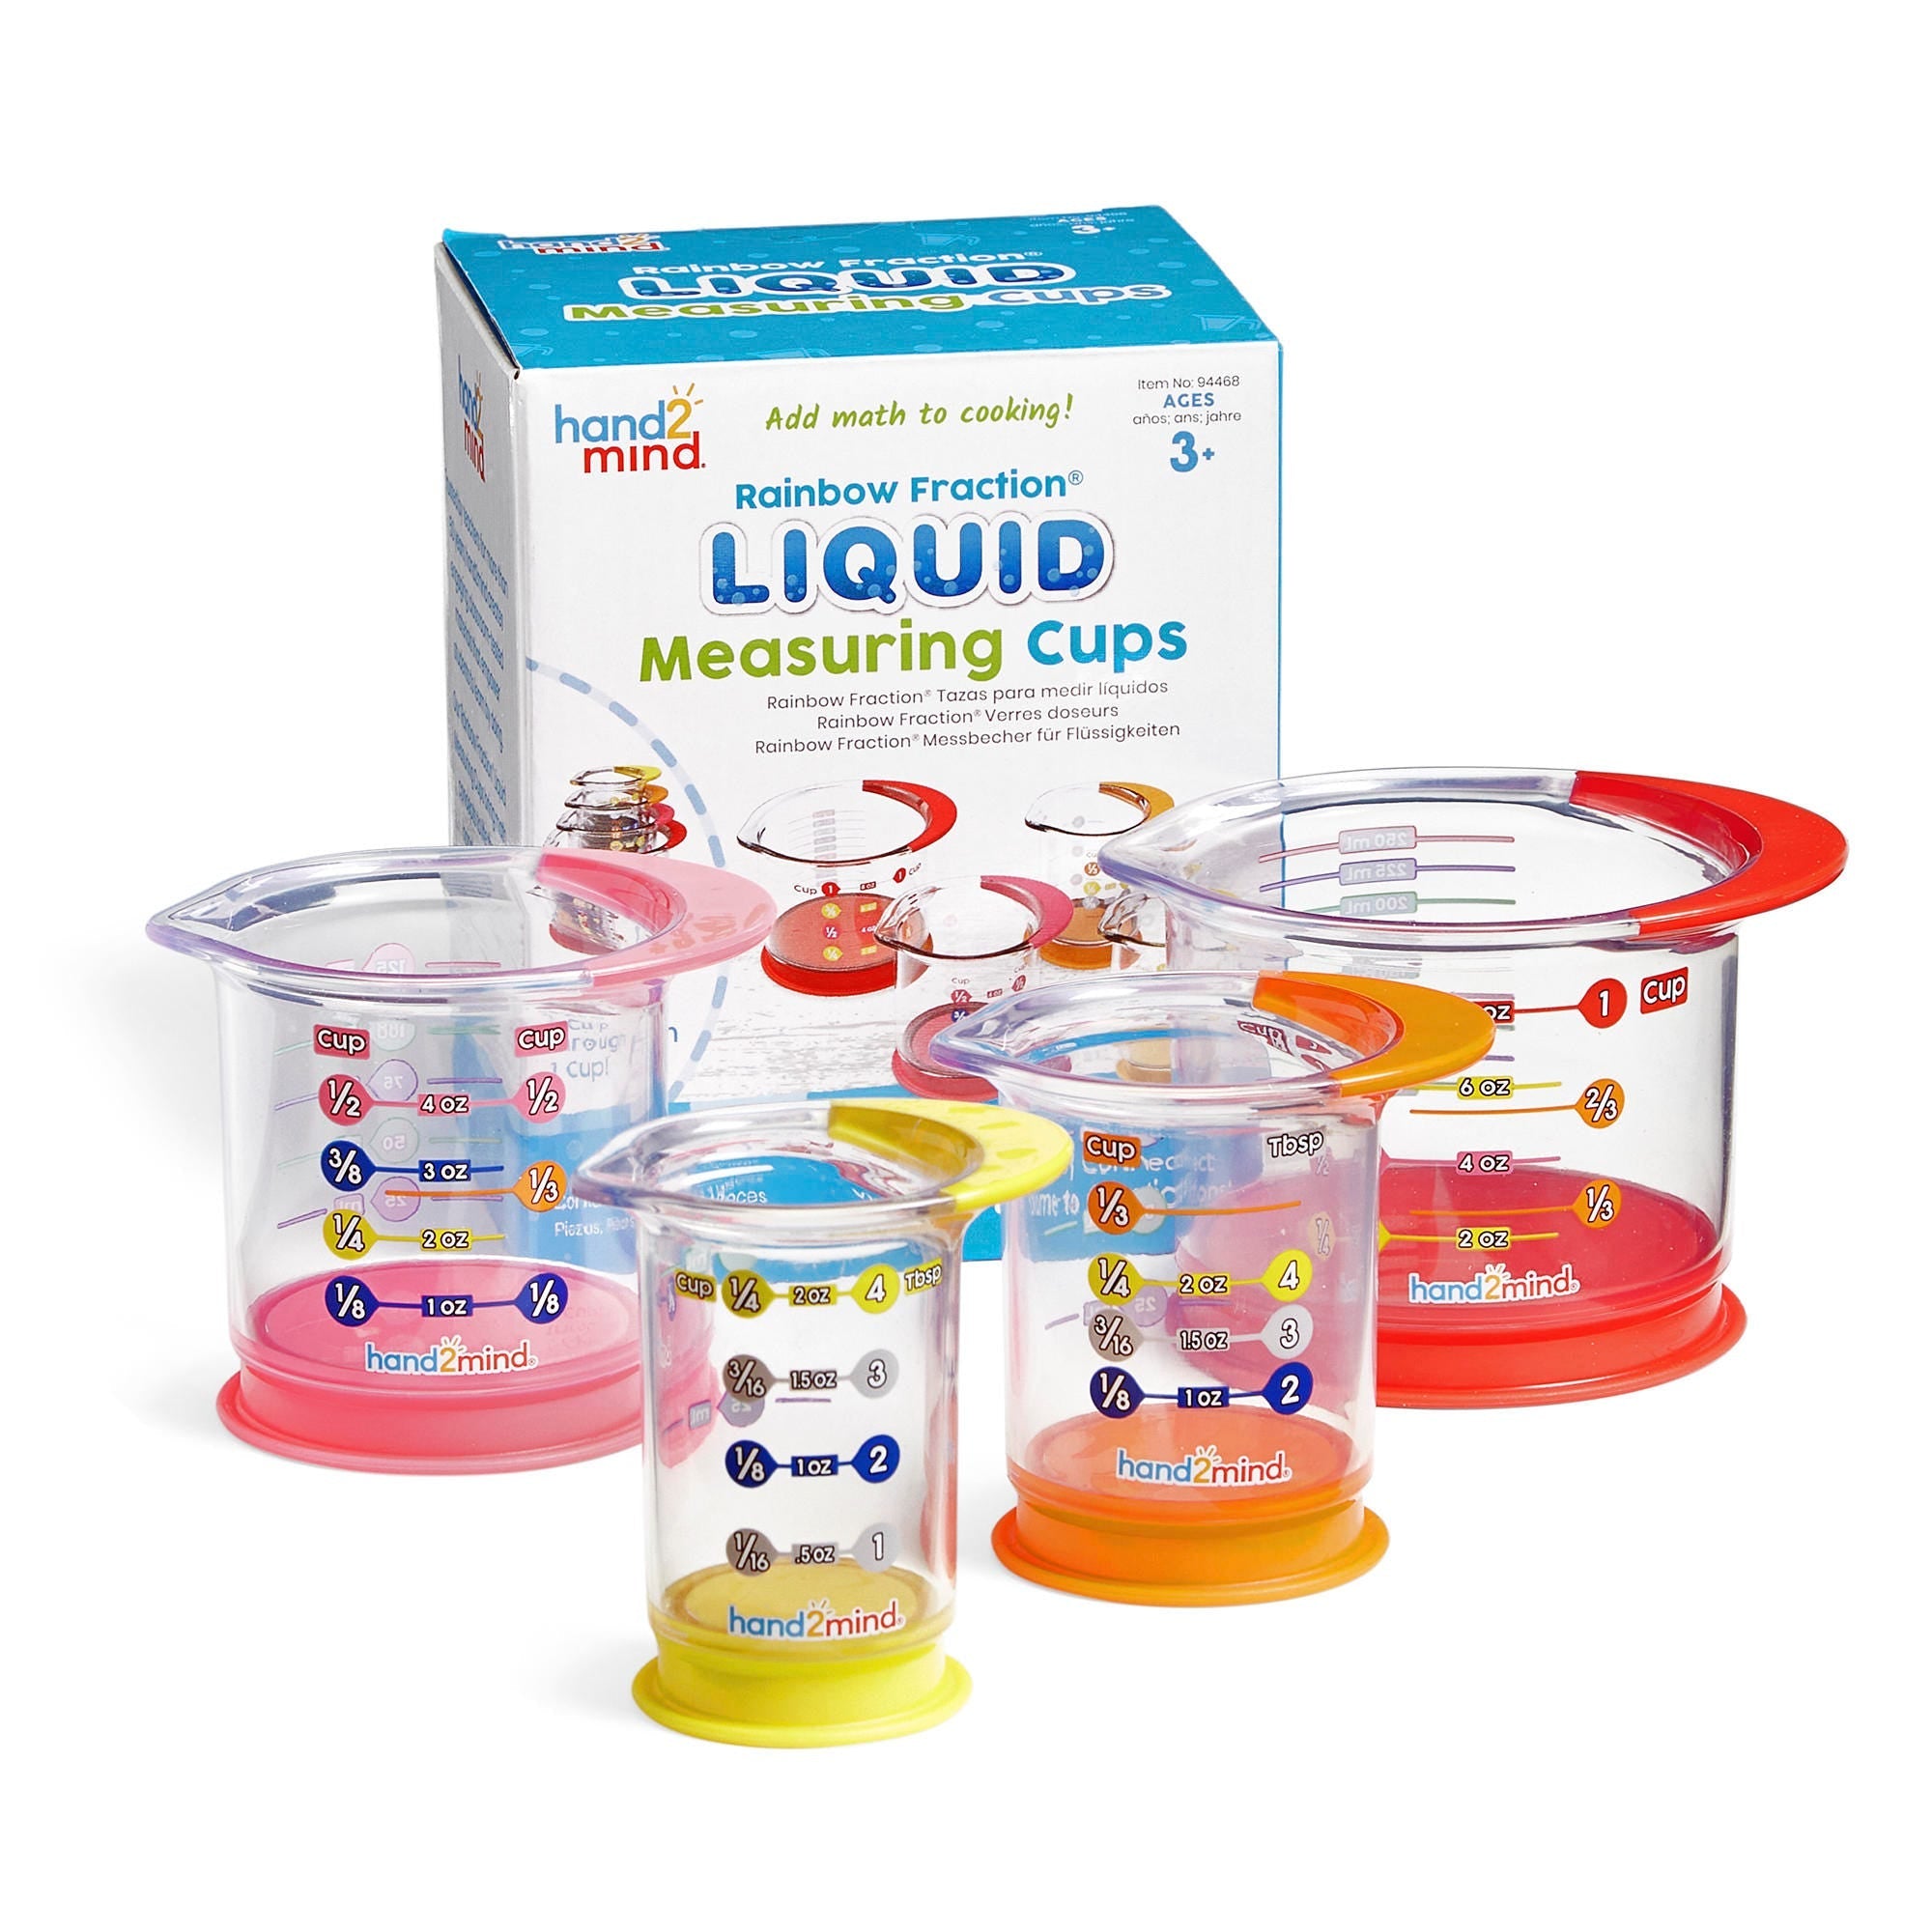 Rainbow Fraction Liquid Measuring Cups, Make learning to measure easy and fun with the Rainbow Fraction Liquid Measuring Cups. These colorful, food-safe, dishwasher-safe, liquid measuring cups provide a hands-on way for children to learn measurement concepts such as volume, capacity, and fractions while cooking or engaging in imaginative play.Plus these Rainbow Fraction Liquid Measuring Cups have a nesting design meaning they make learning to measure easy and fun Highlights of the Rainbow Fraction Liquid Me